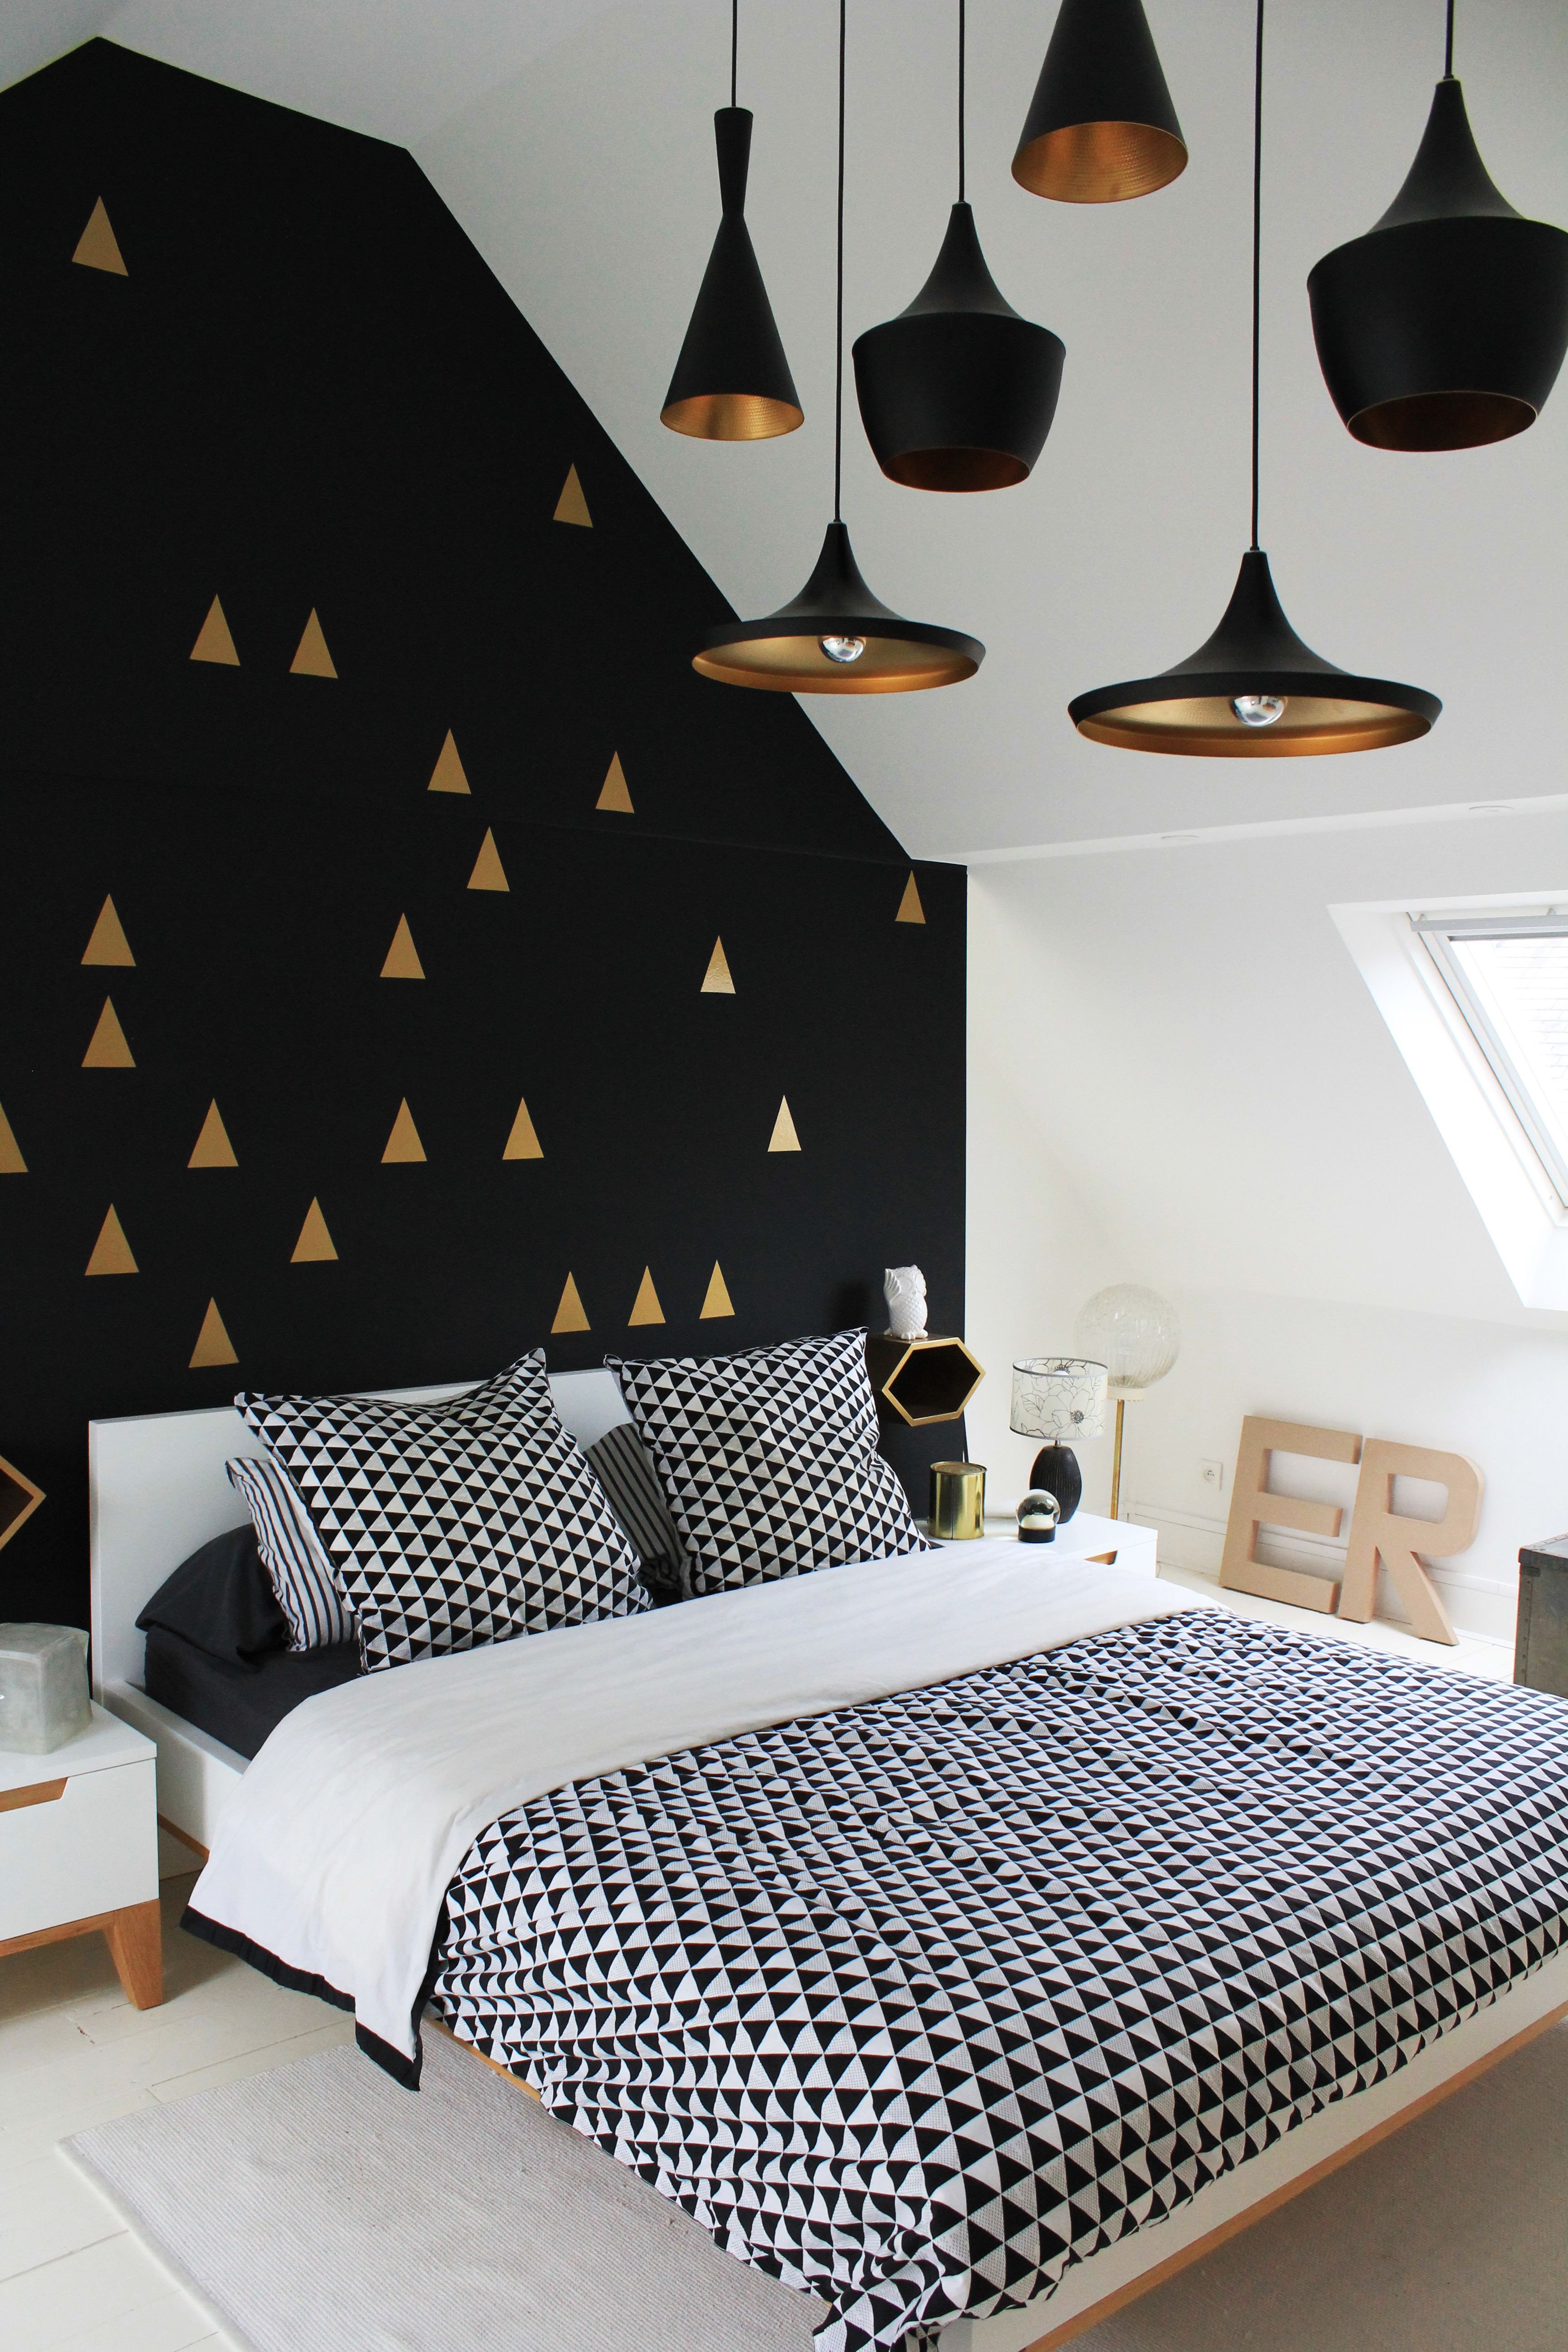 Black and Brown Bedroom Elegant Bedroom White Gold and Black Interior Love the Wall and